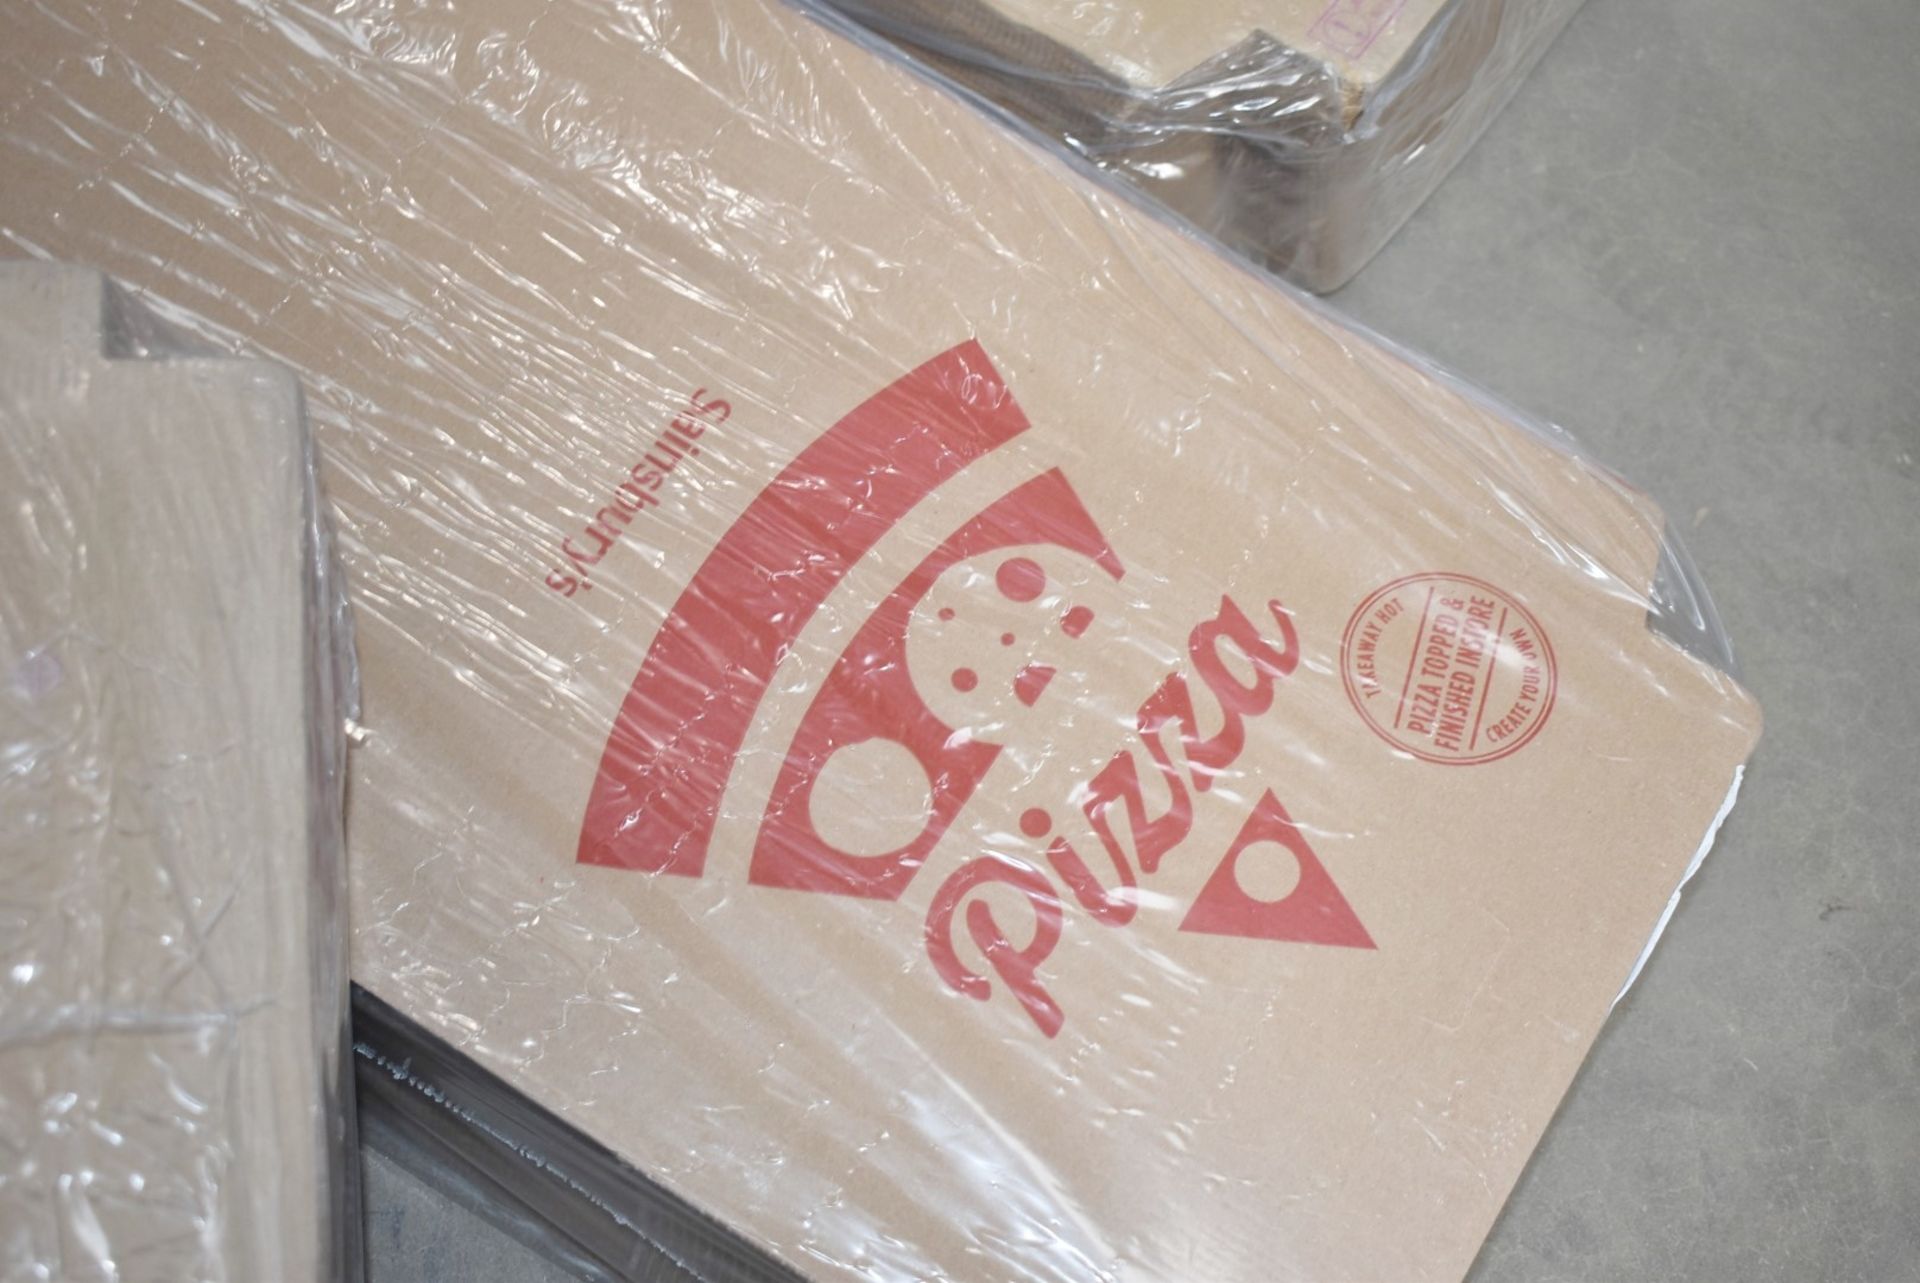 300 x Supermarket Branded 10 Inch Pizza Boxes - Includes 3 x Boxes of 100 - New and Sealed - CL232 - - Image 2 of 11